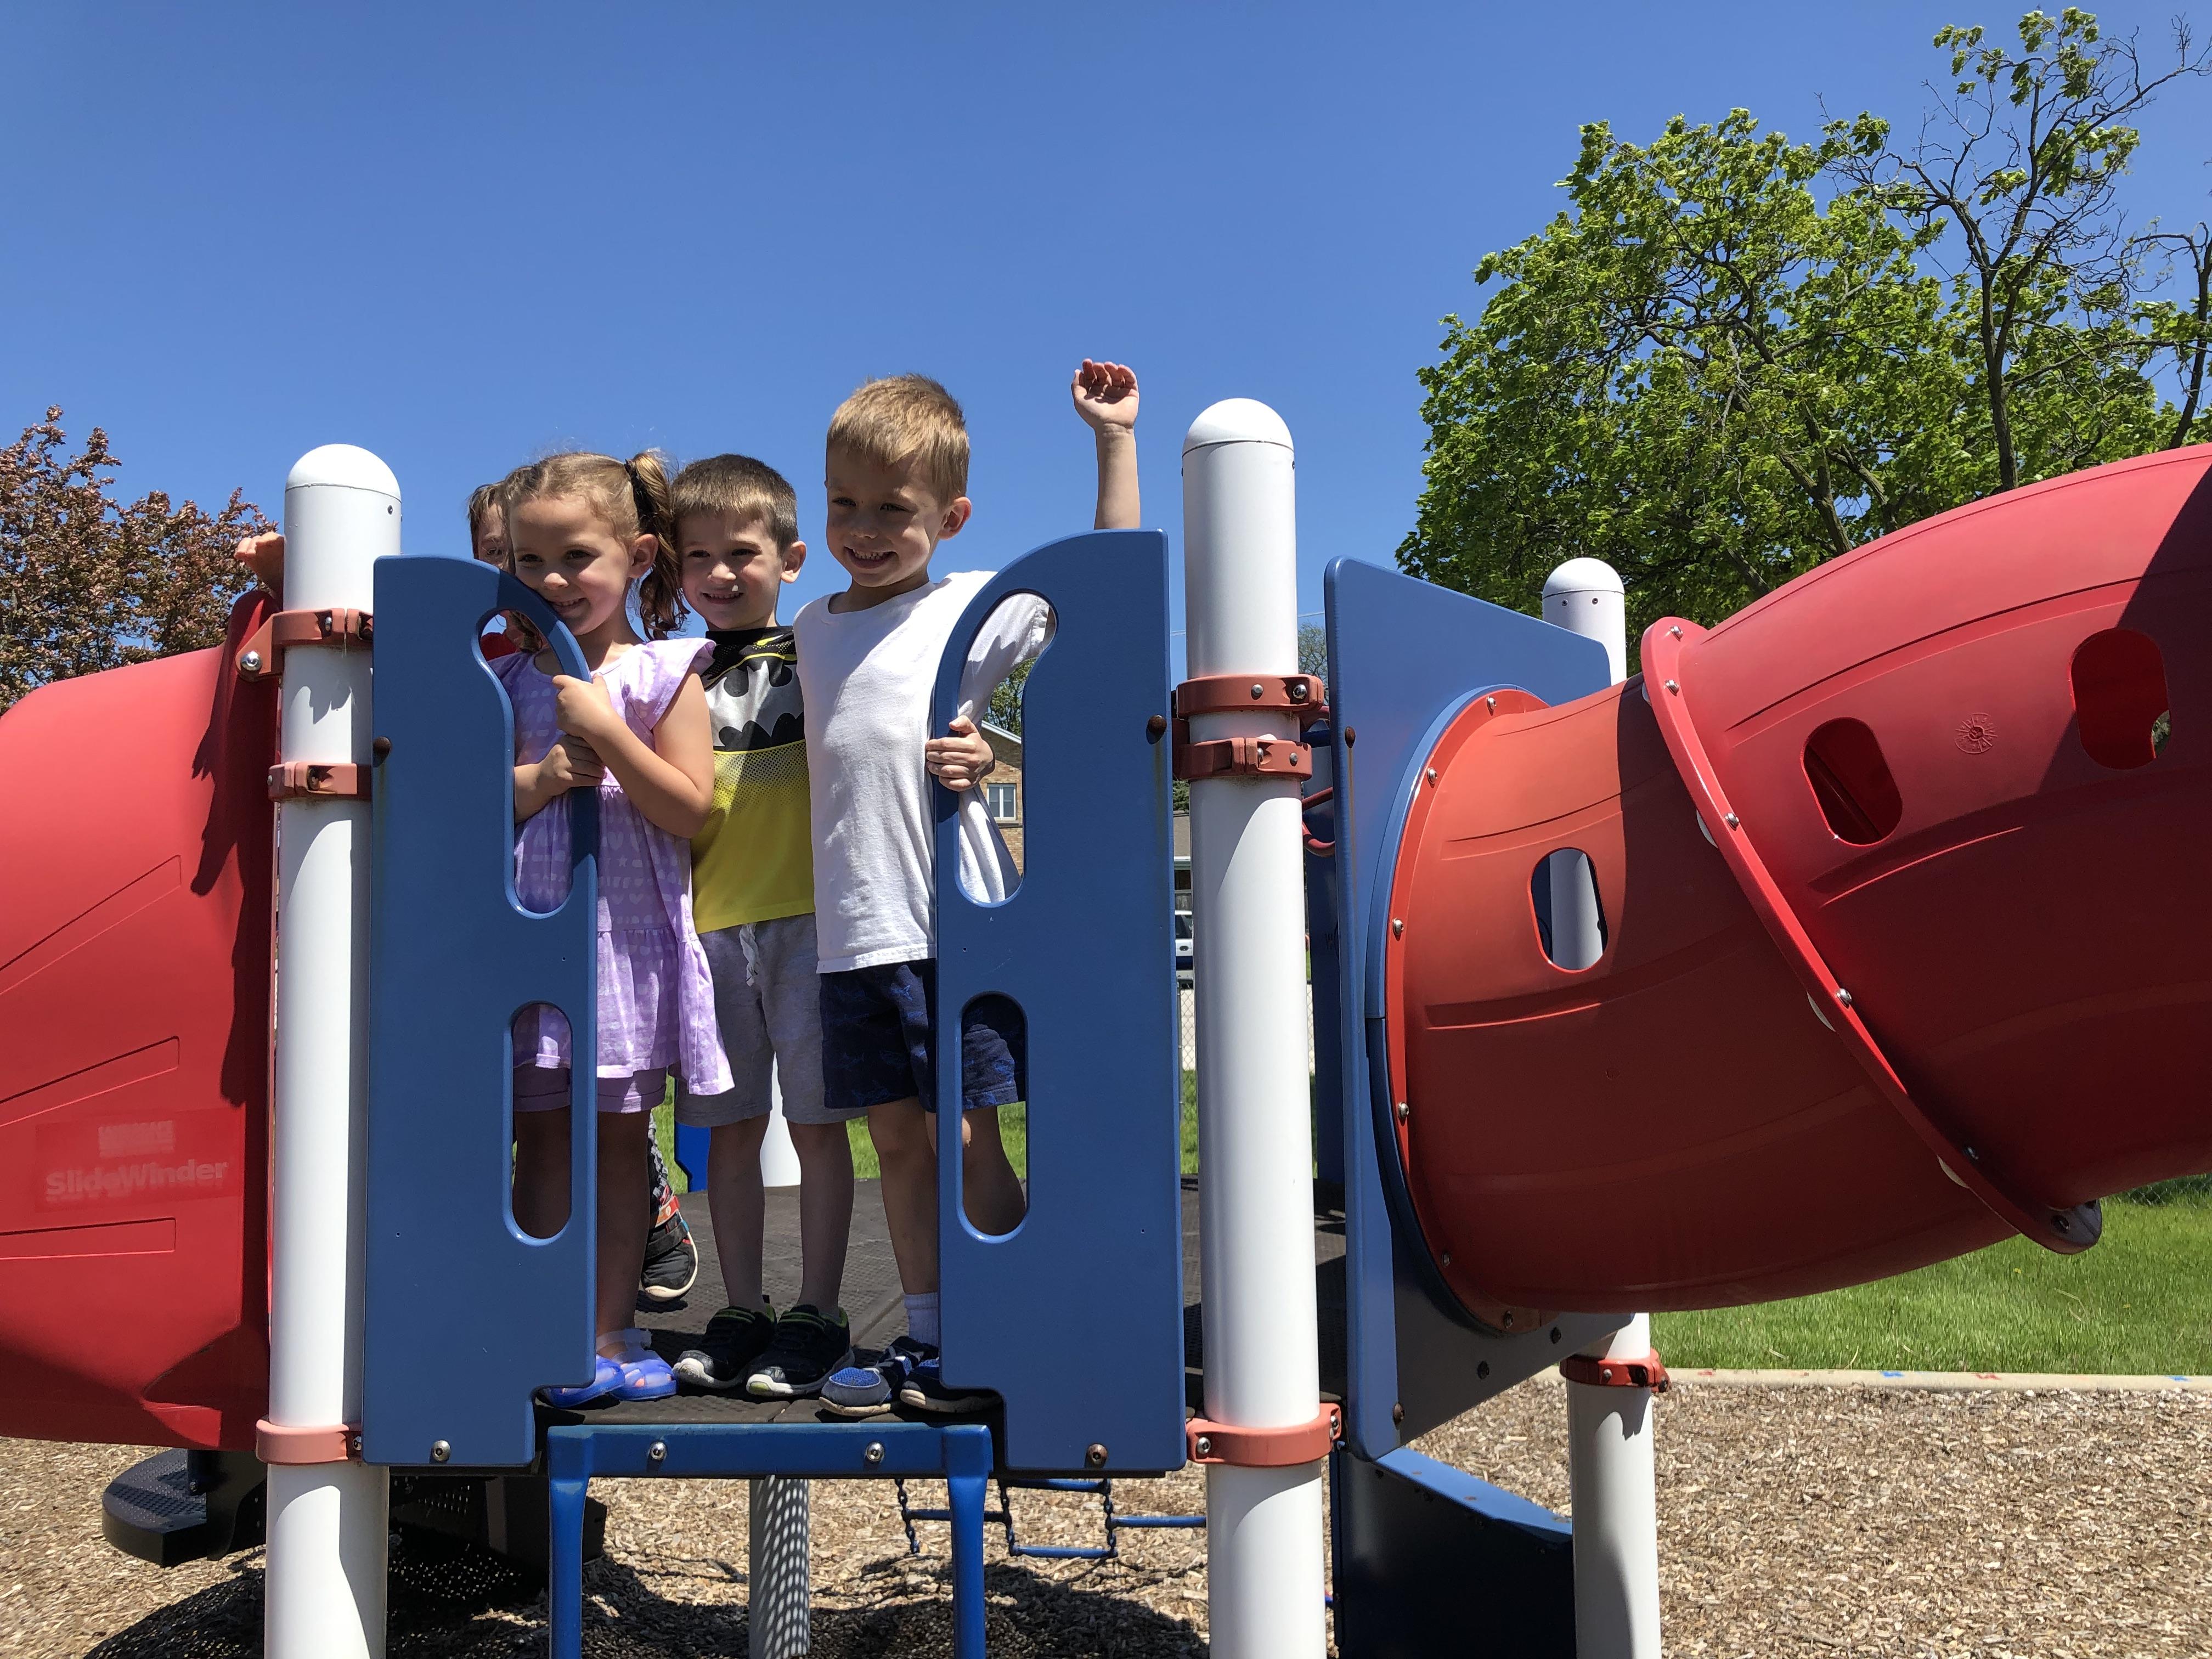 Students on play set